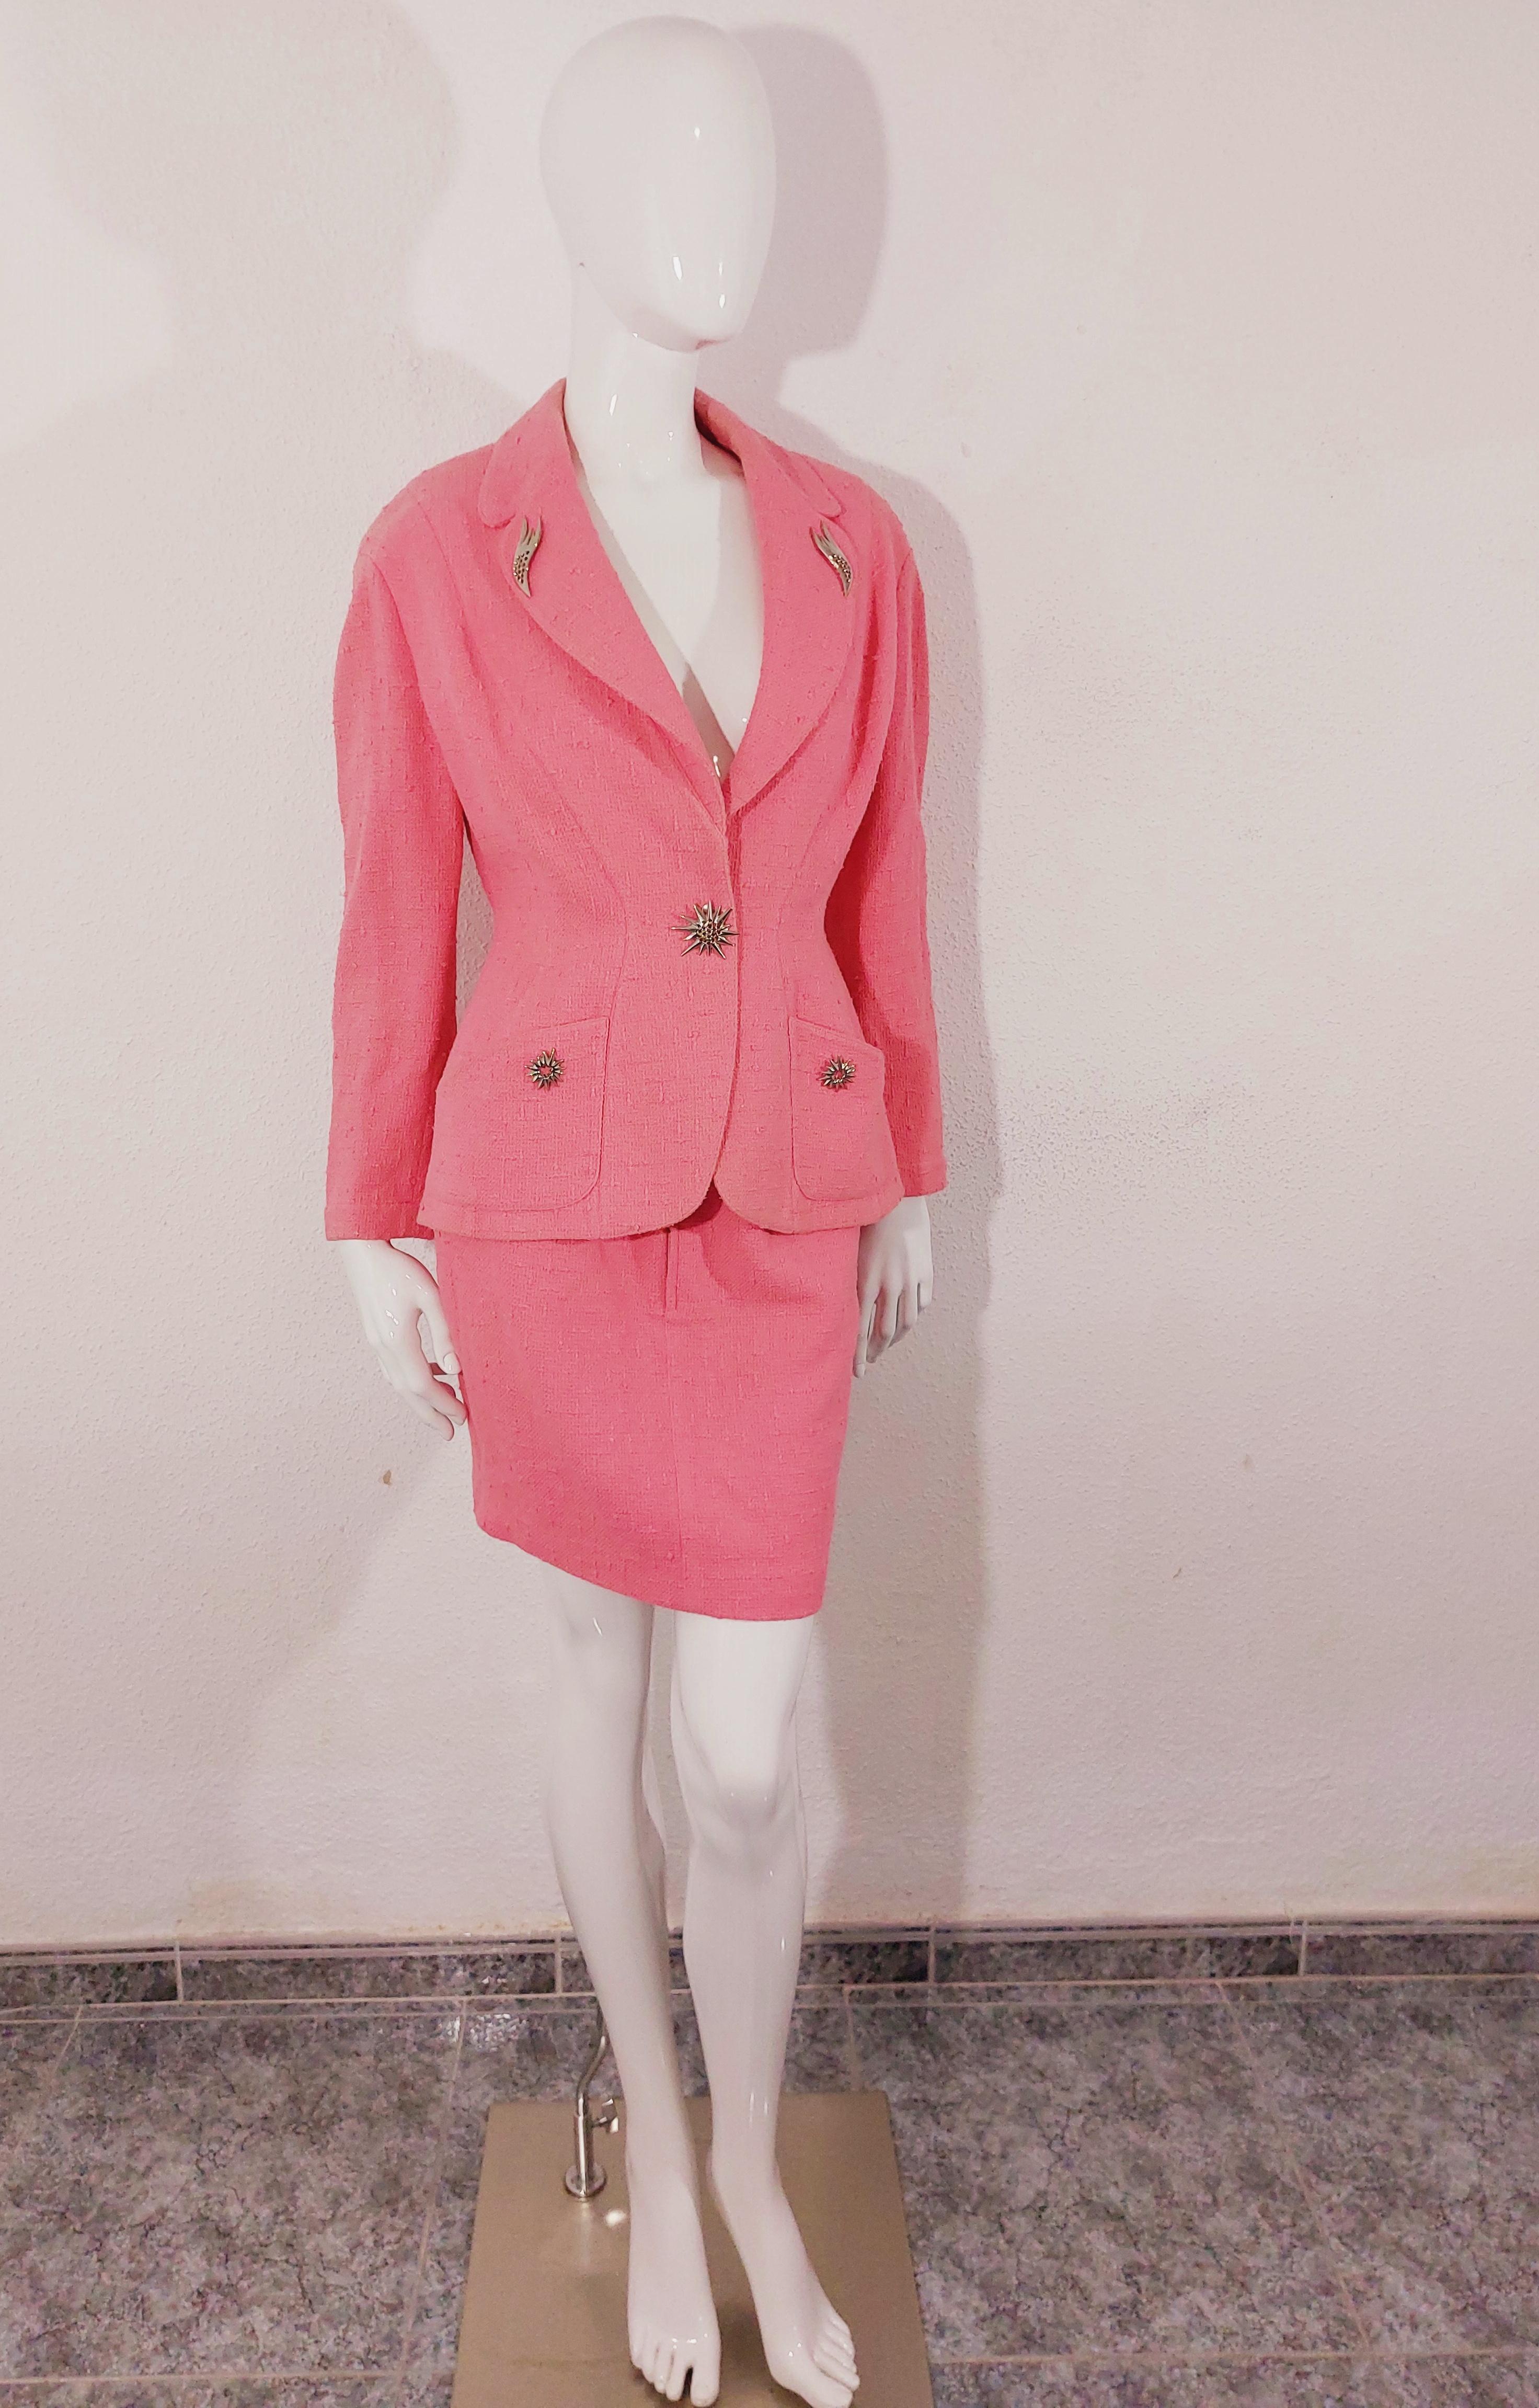 Thierry Mugler Couture Broche FW 1990 Sculptural Exaggerated Dramatic Silhouette Jacket Pink Silver Badge Pin Blazer Coat Jacket Skirt Suit
Fabuleux et rare costume de Thierry Mugler, Collectional FW 1990. Cette silhouette sculpturale dramatique est